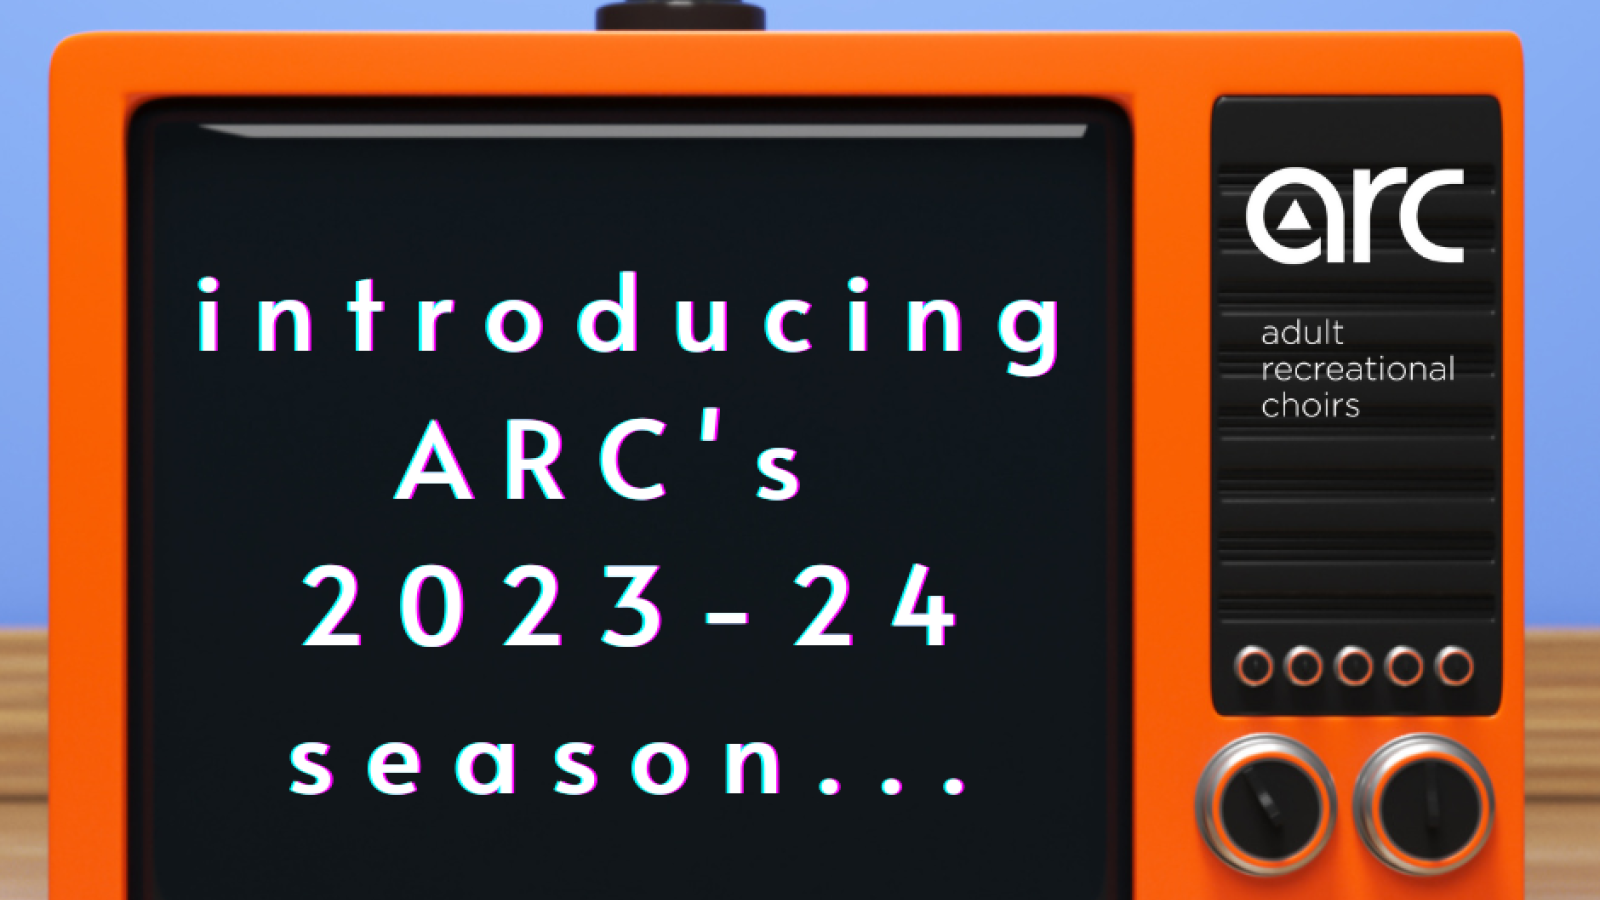 Graphic of an old television, with wording "Program Interruption...introducing ARC's 2023-24 season"